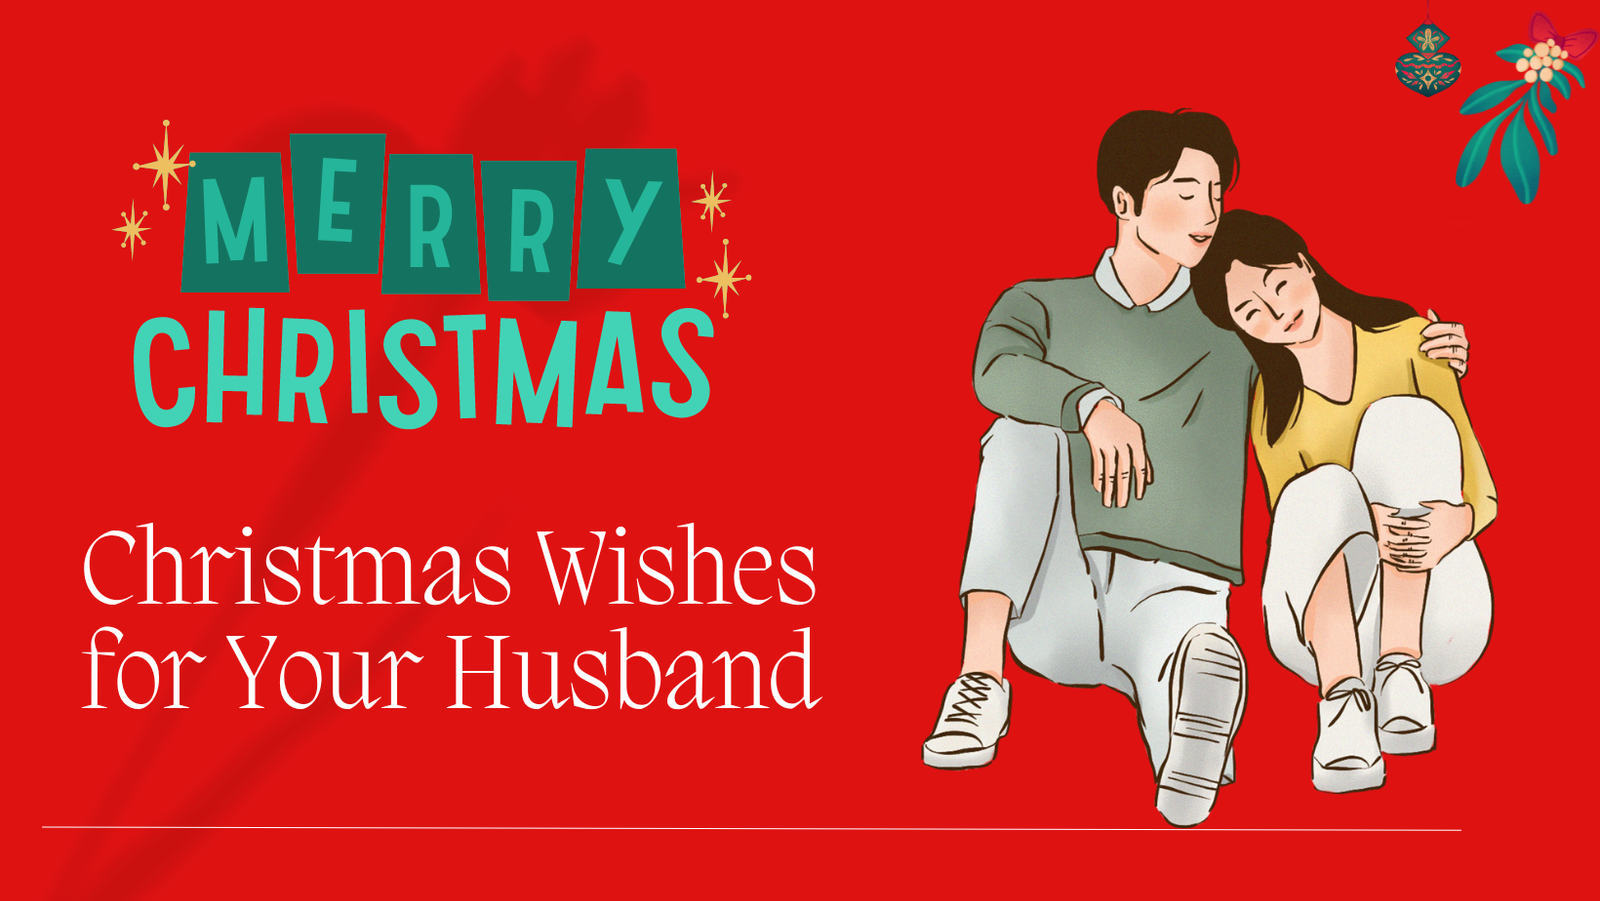 Expressing Love: 15 Heartwarming Christmas Wishes for Your Beloved Husband